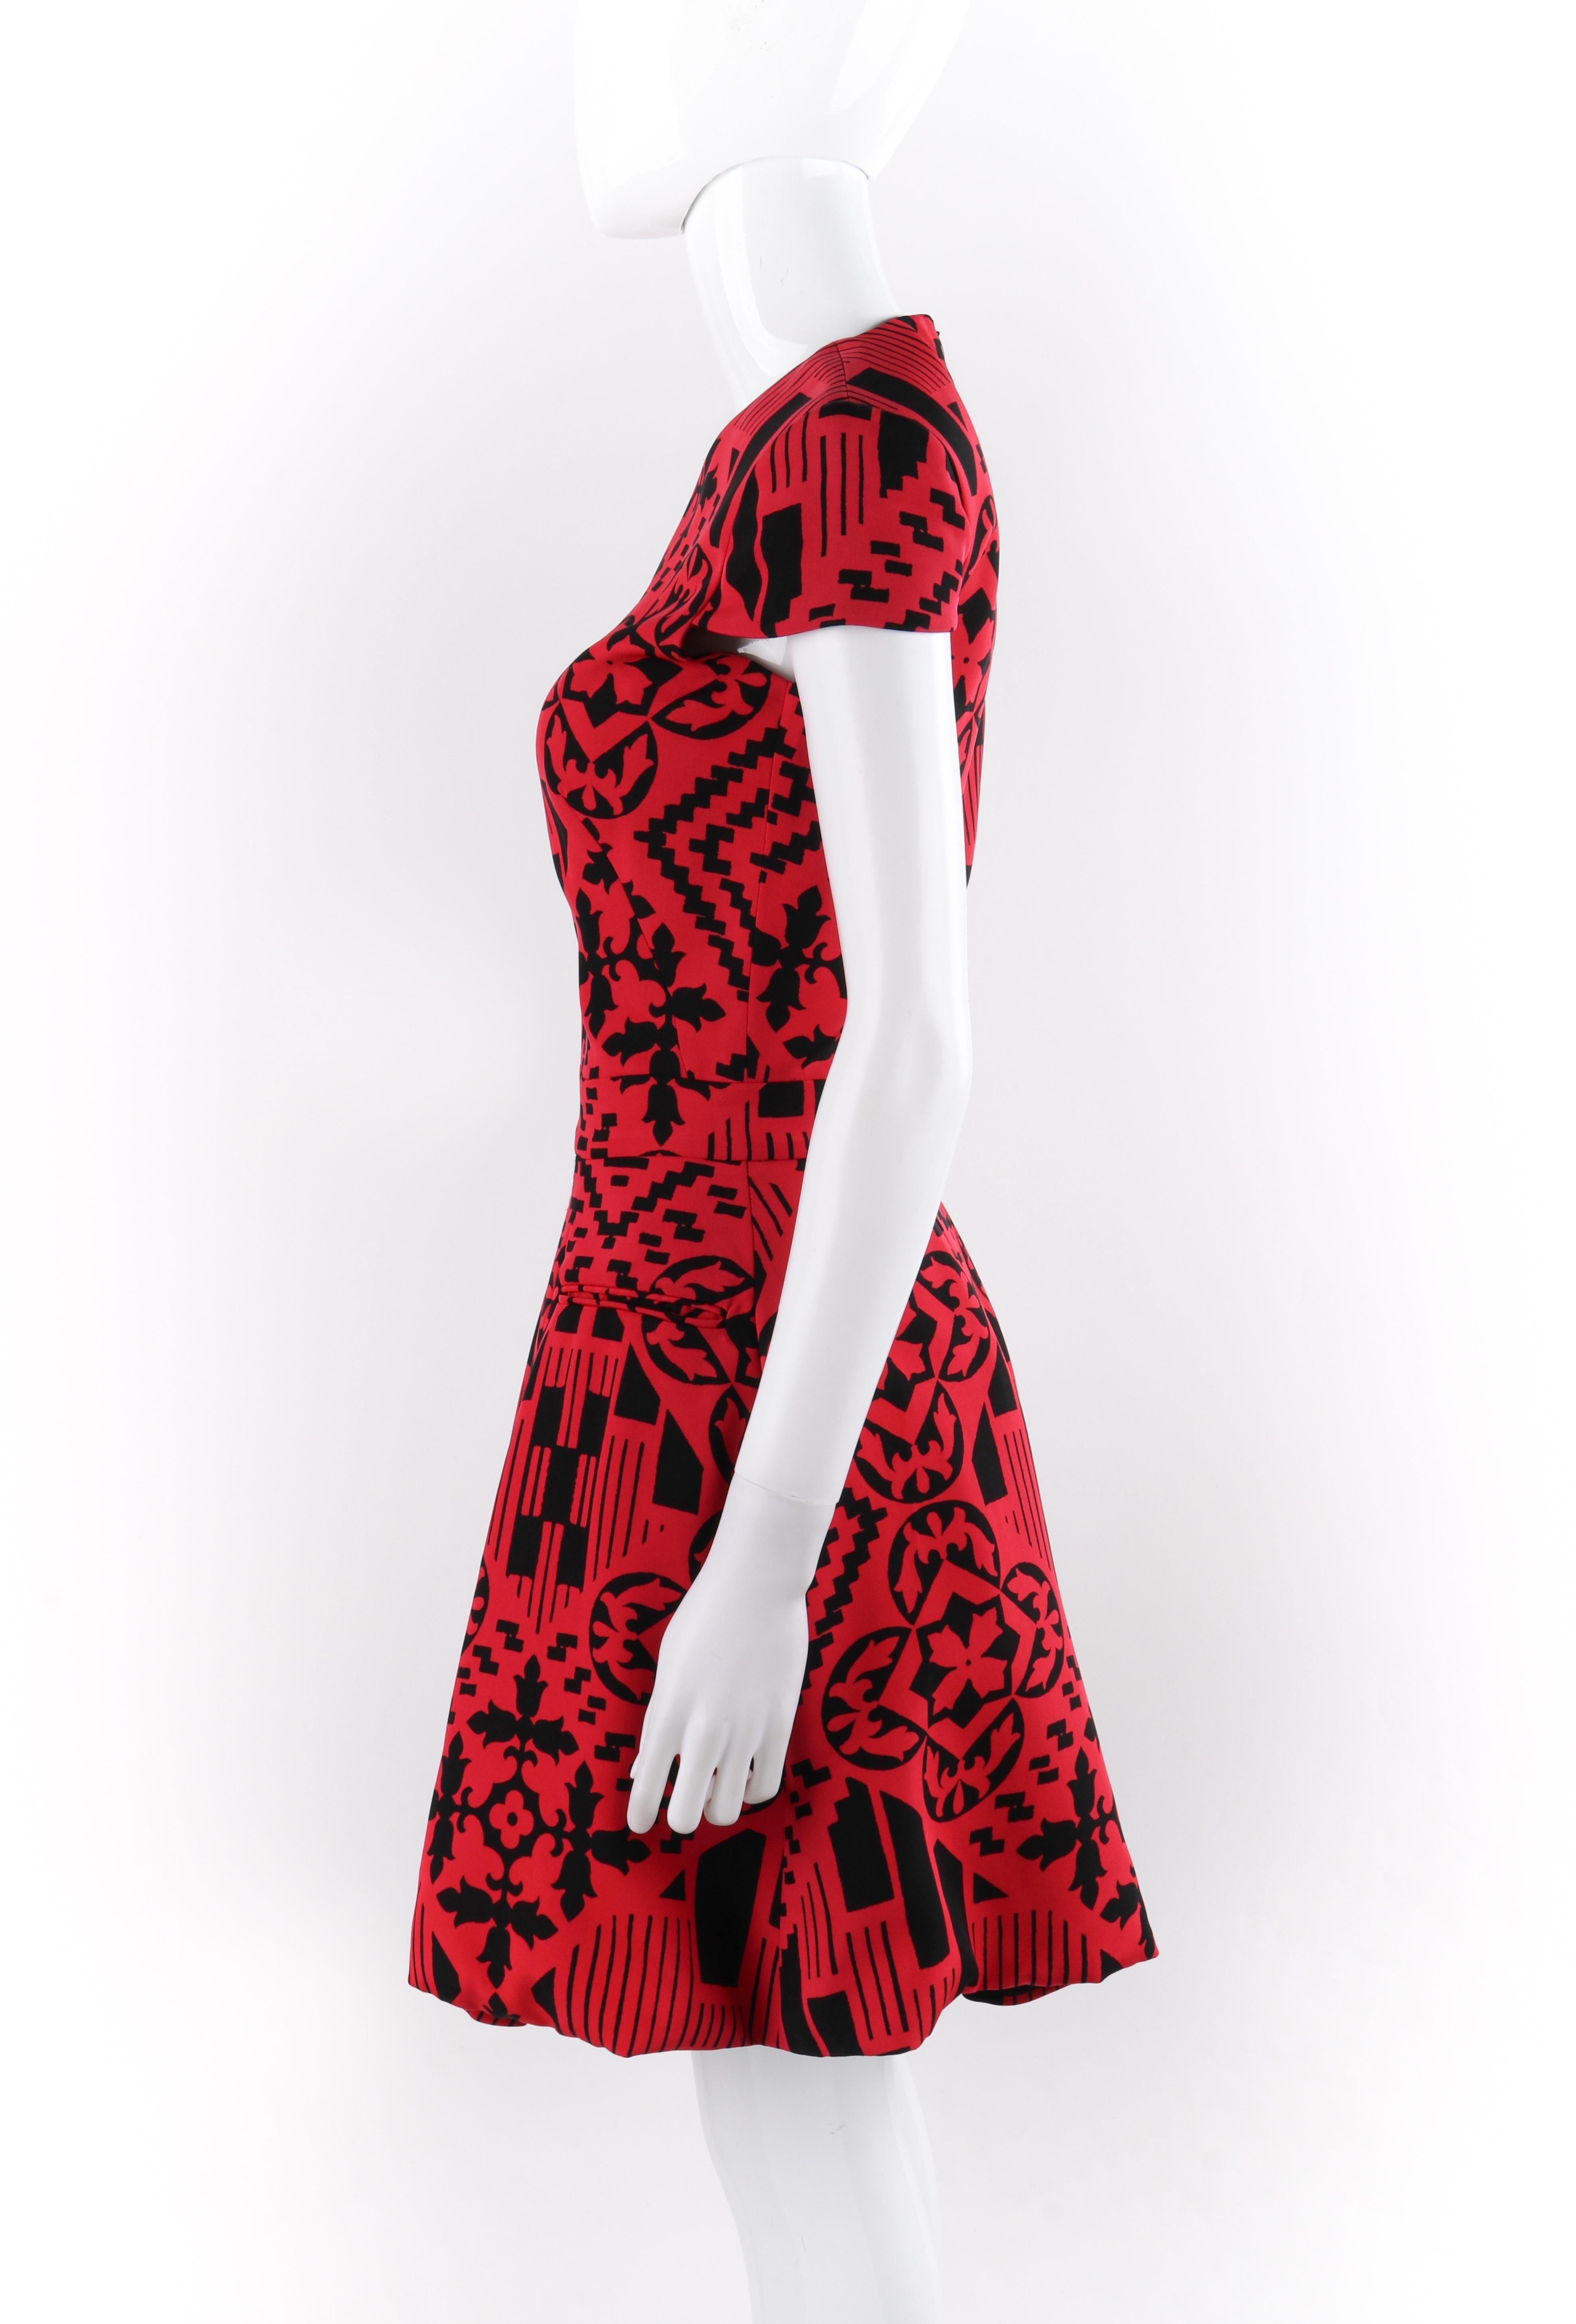 ALEXANDER McQUEEN S/S 2014 Red Black Mosaic Shape Print Fit N Flare Skater Dress In Good Condition In Thiensville, WI